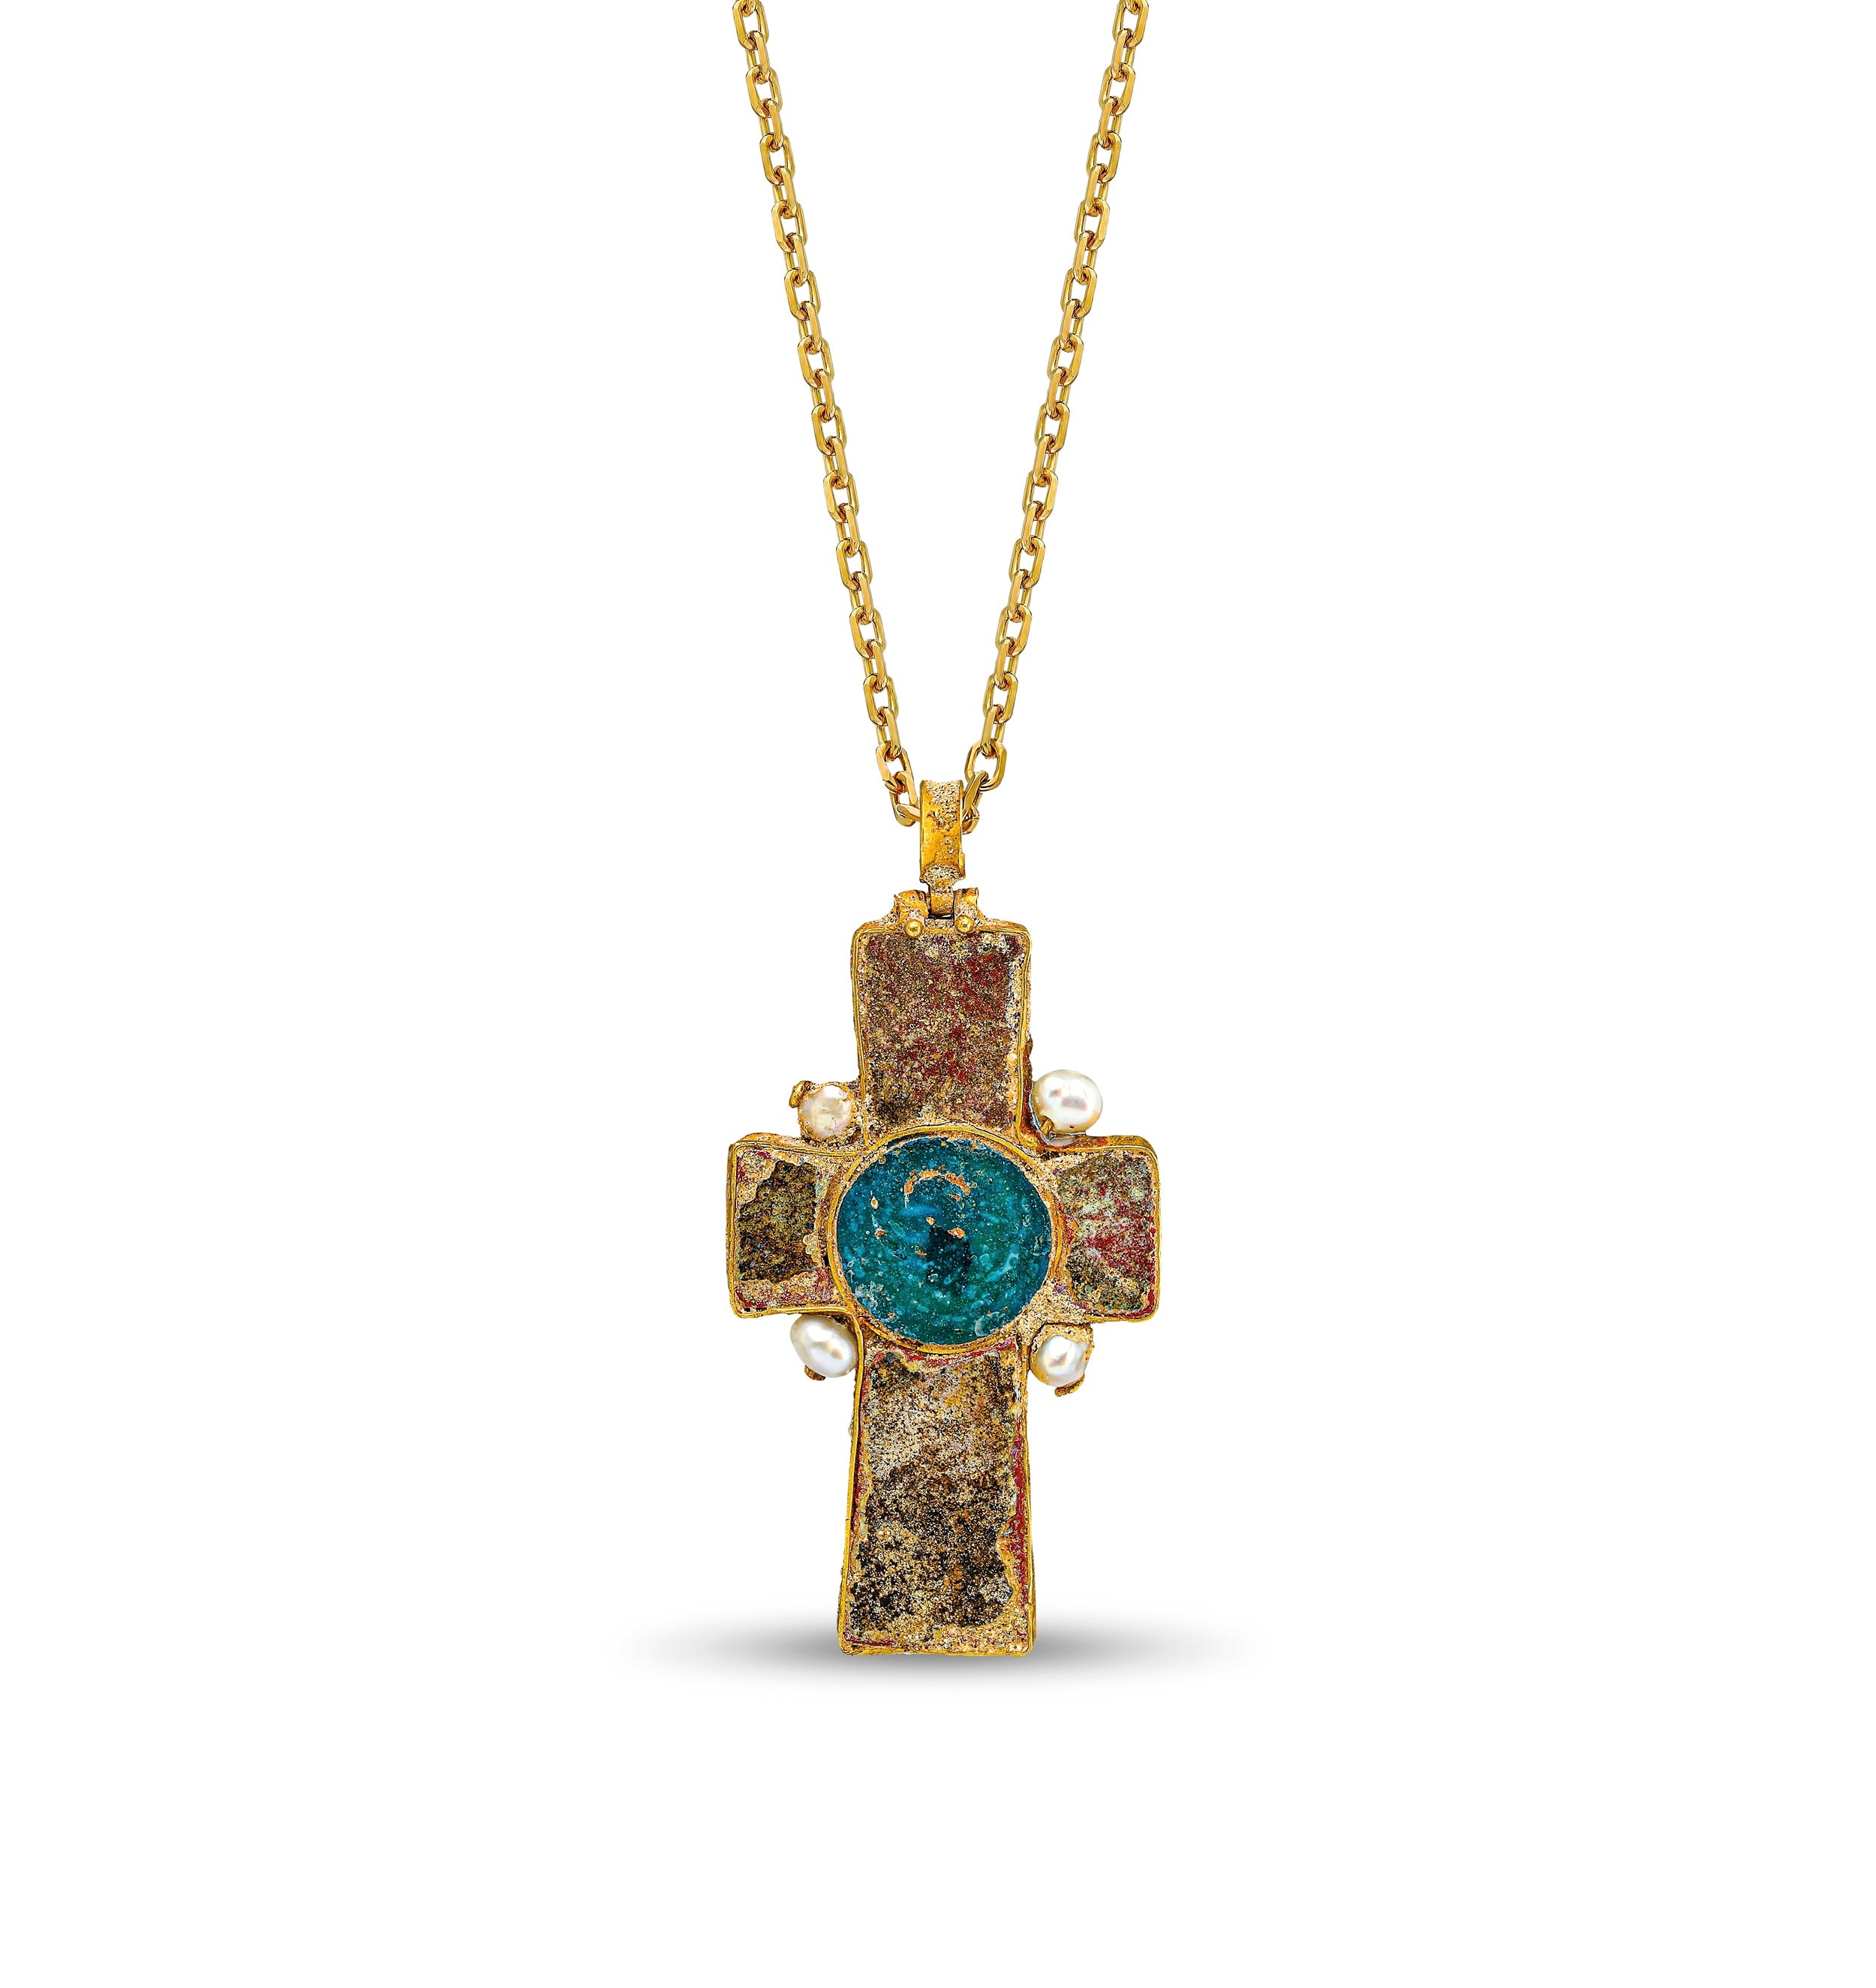 THE ETRUSCAN CROSS